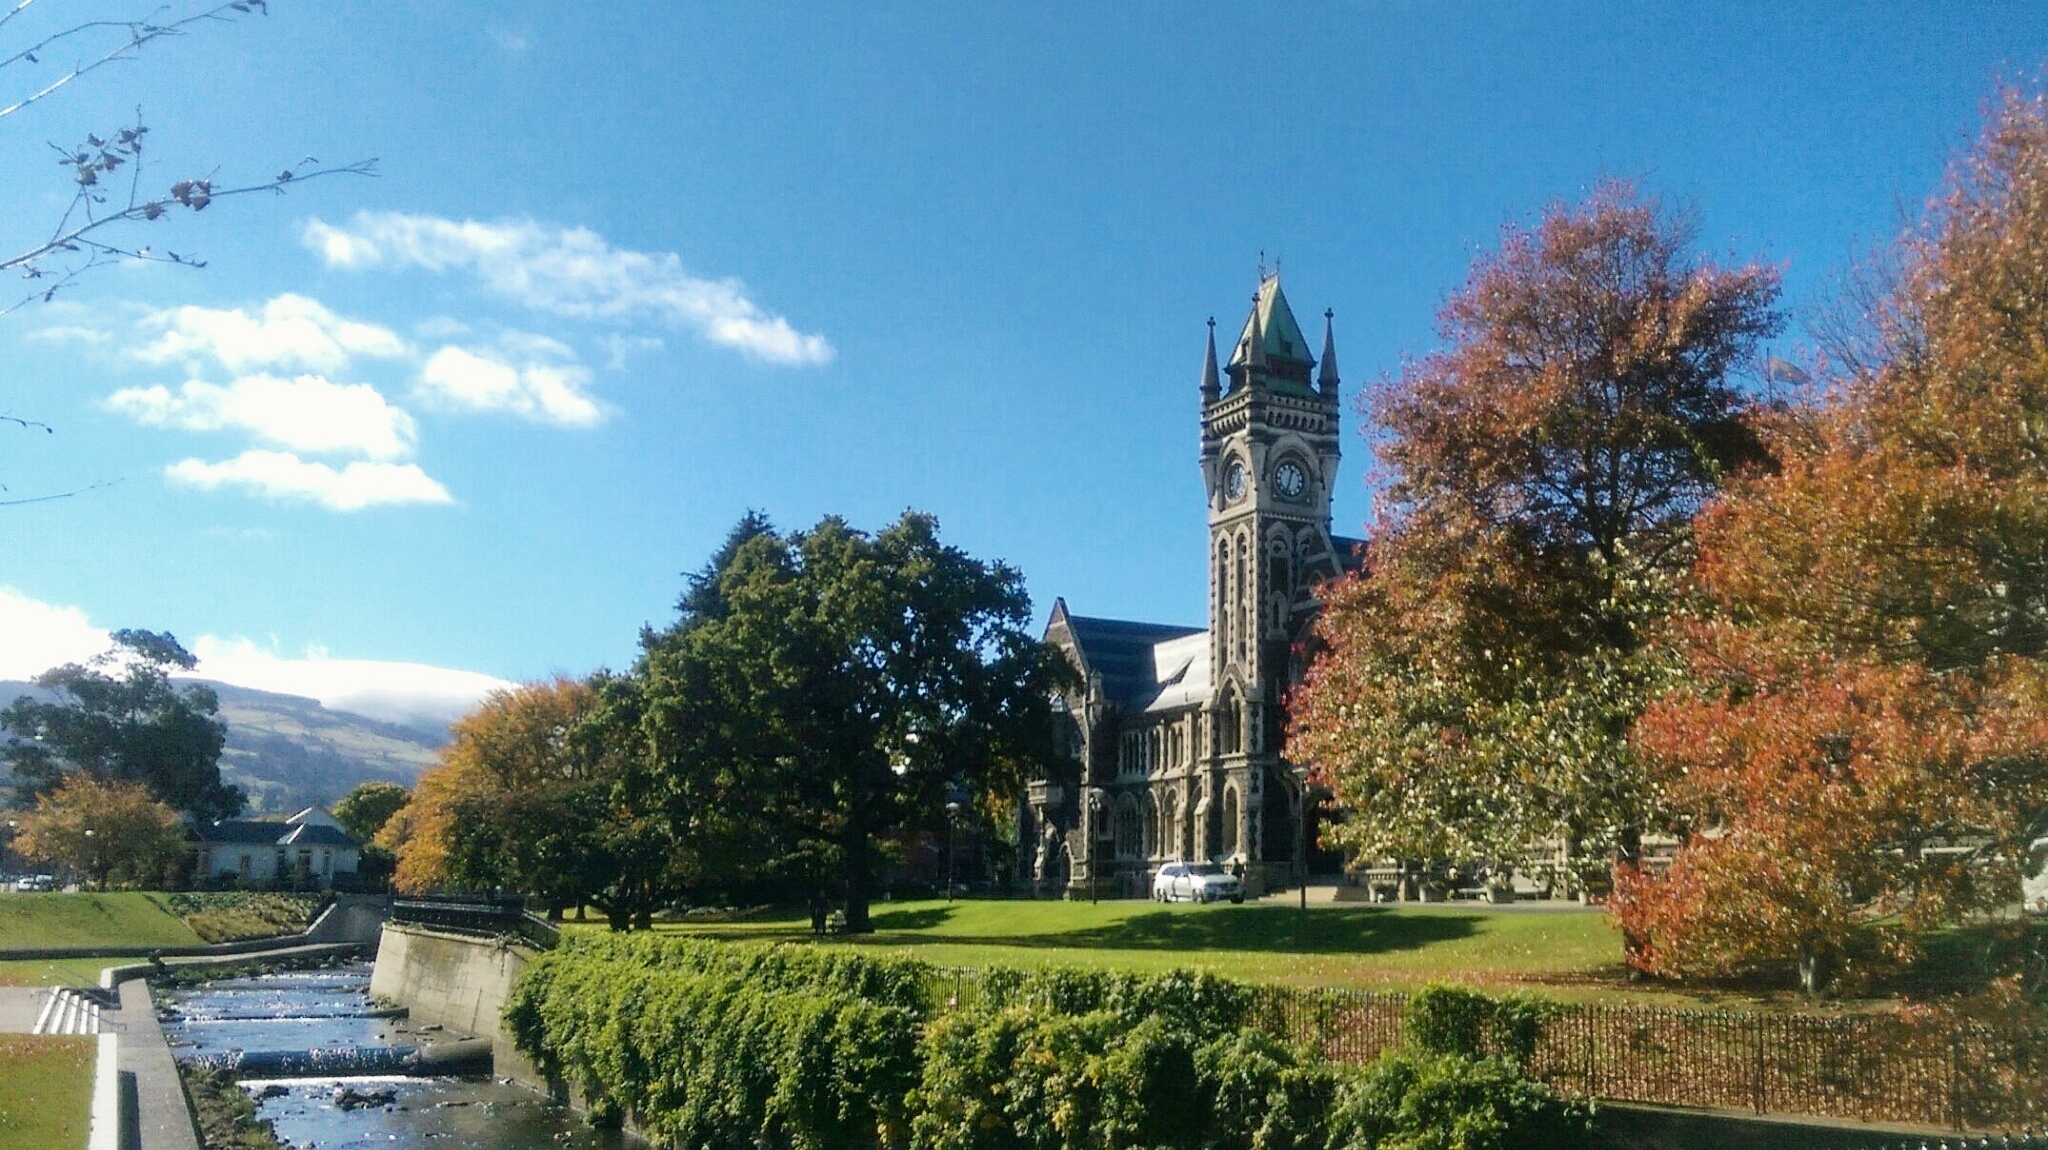 University of Otago p.s could you place this as main photo please. Thanks